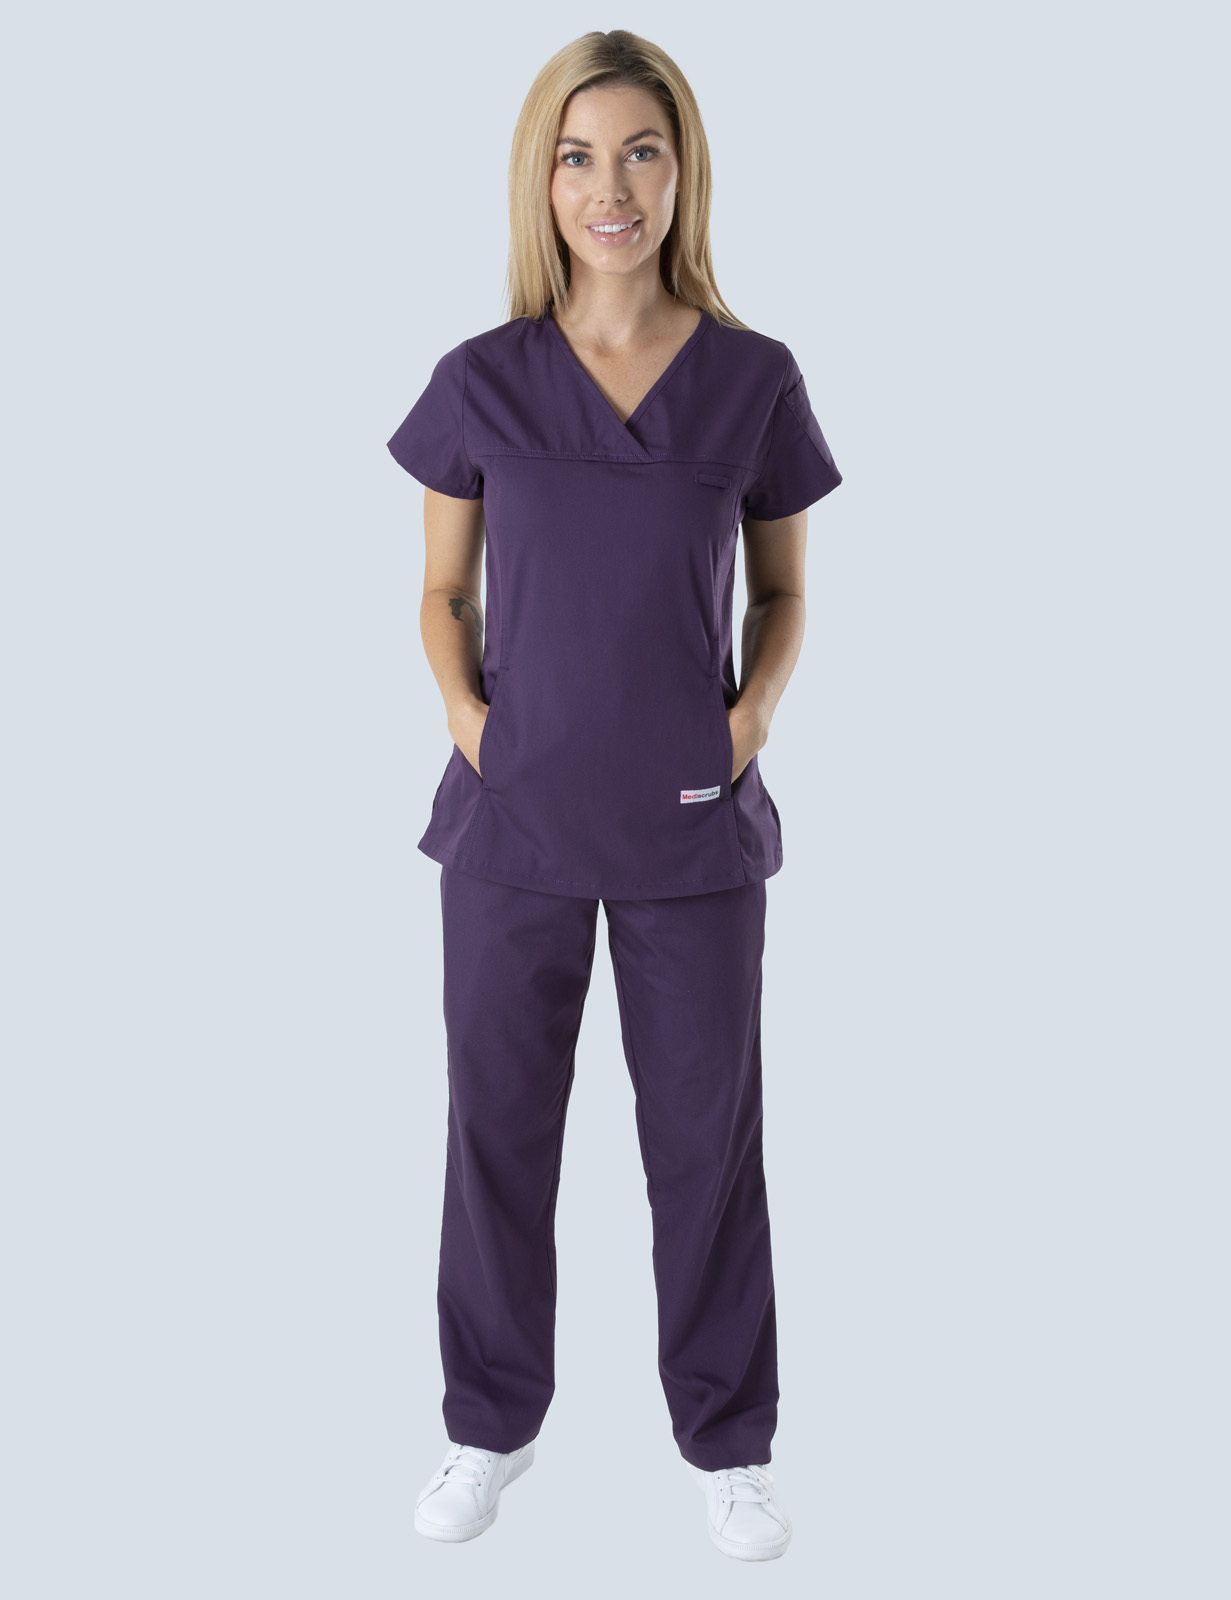 Caloundra Hospital - Midwife (Women's Fit Solid Scrub Top and Cargo Pants in Aubergine incl Logos)